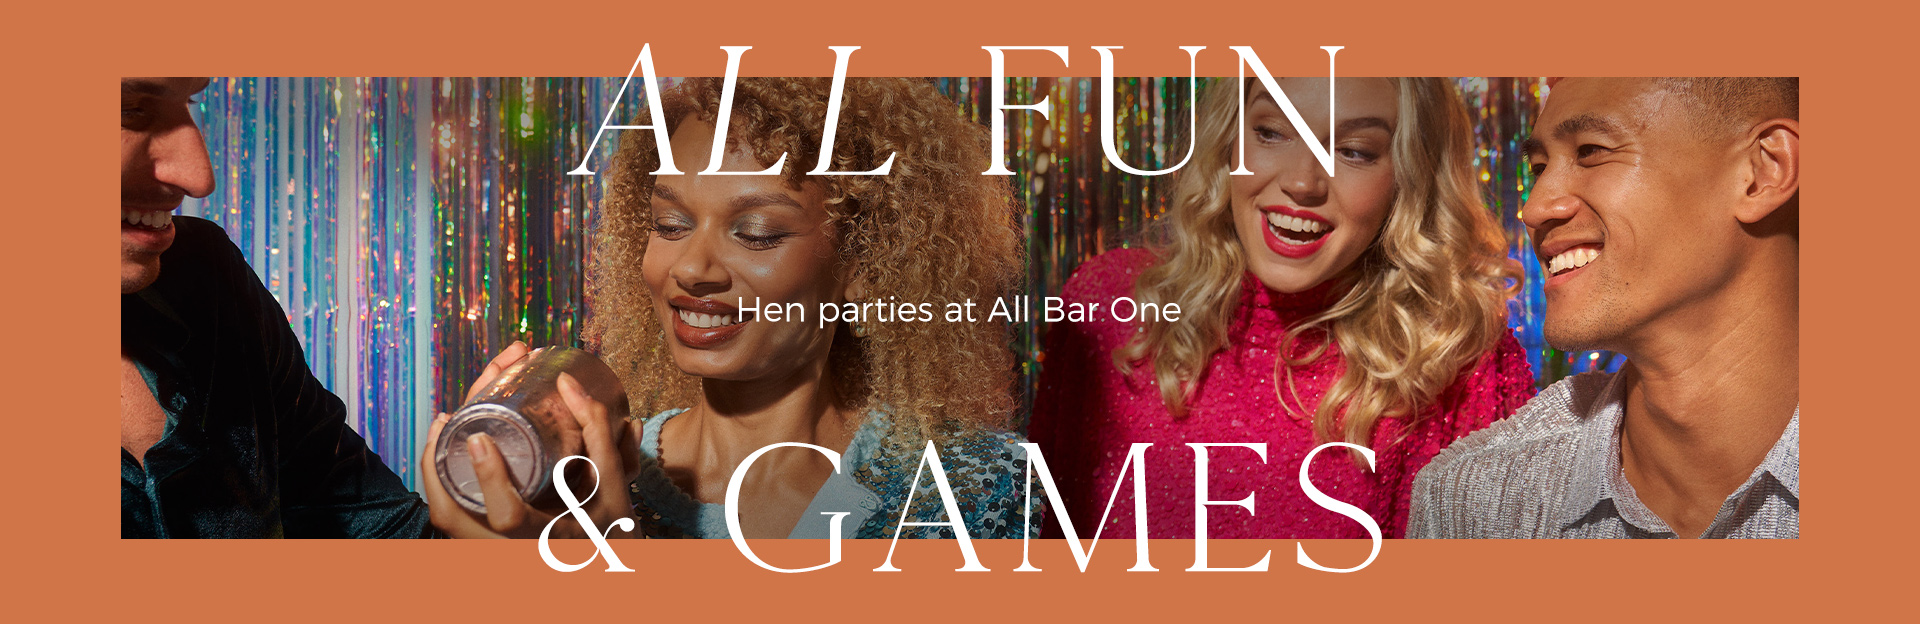 Hen parties at All Bar One